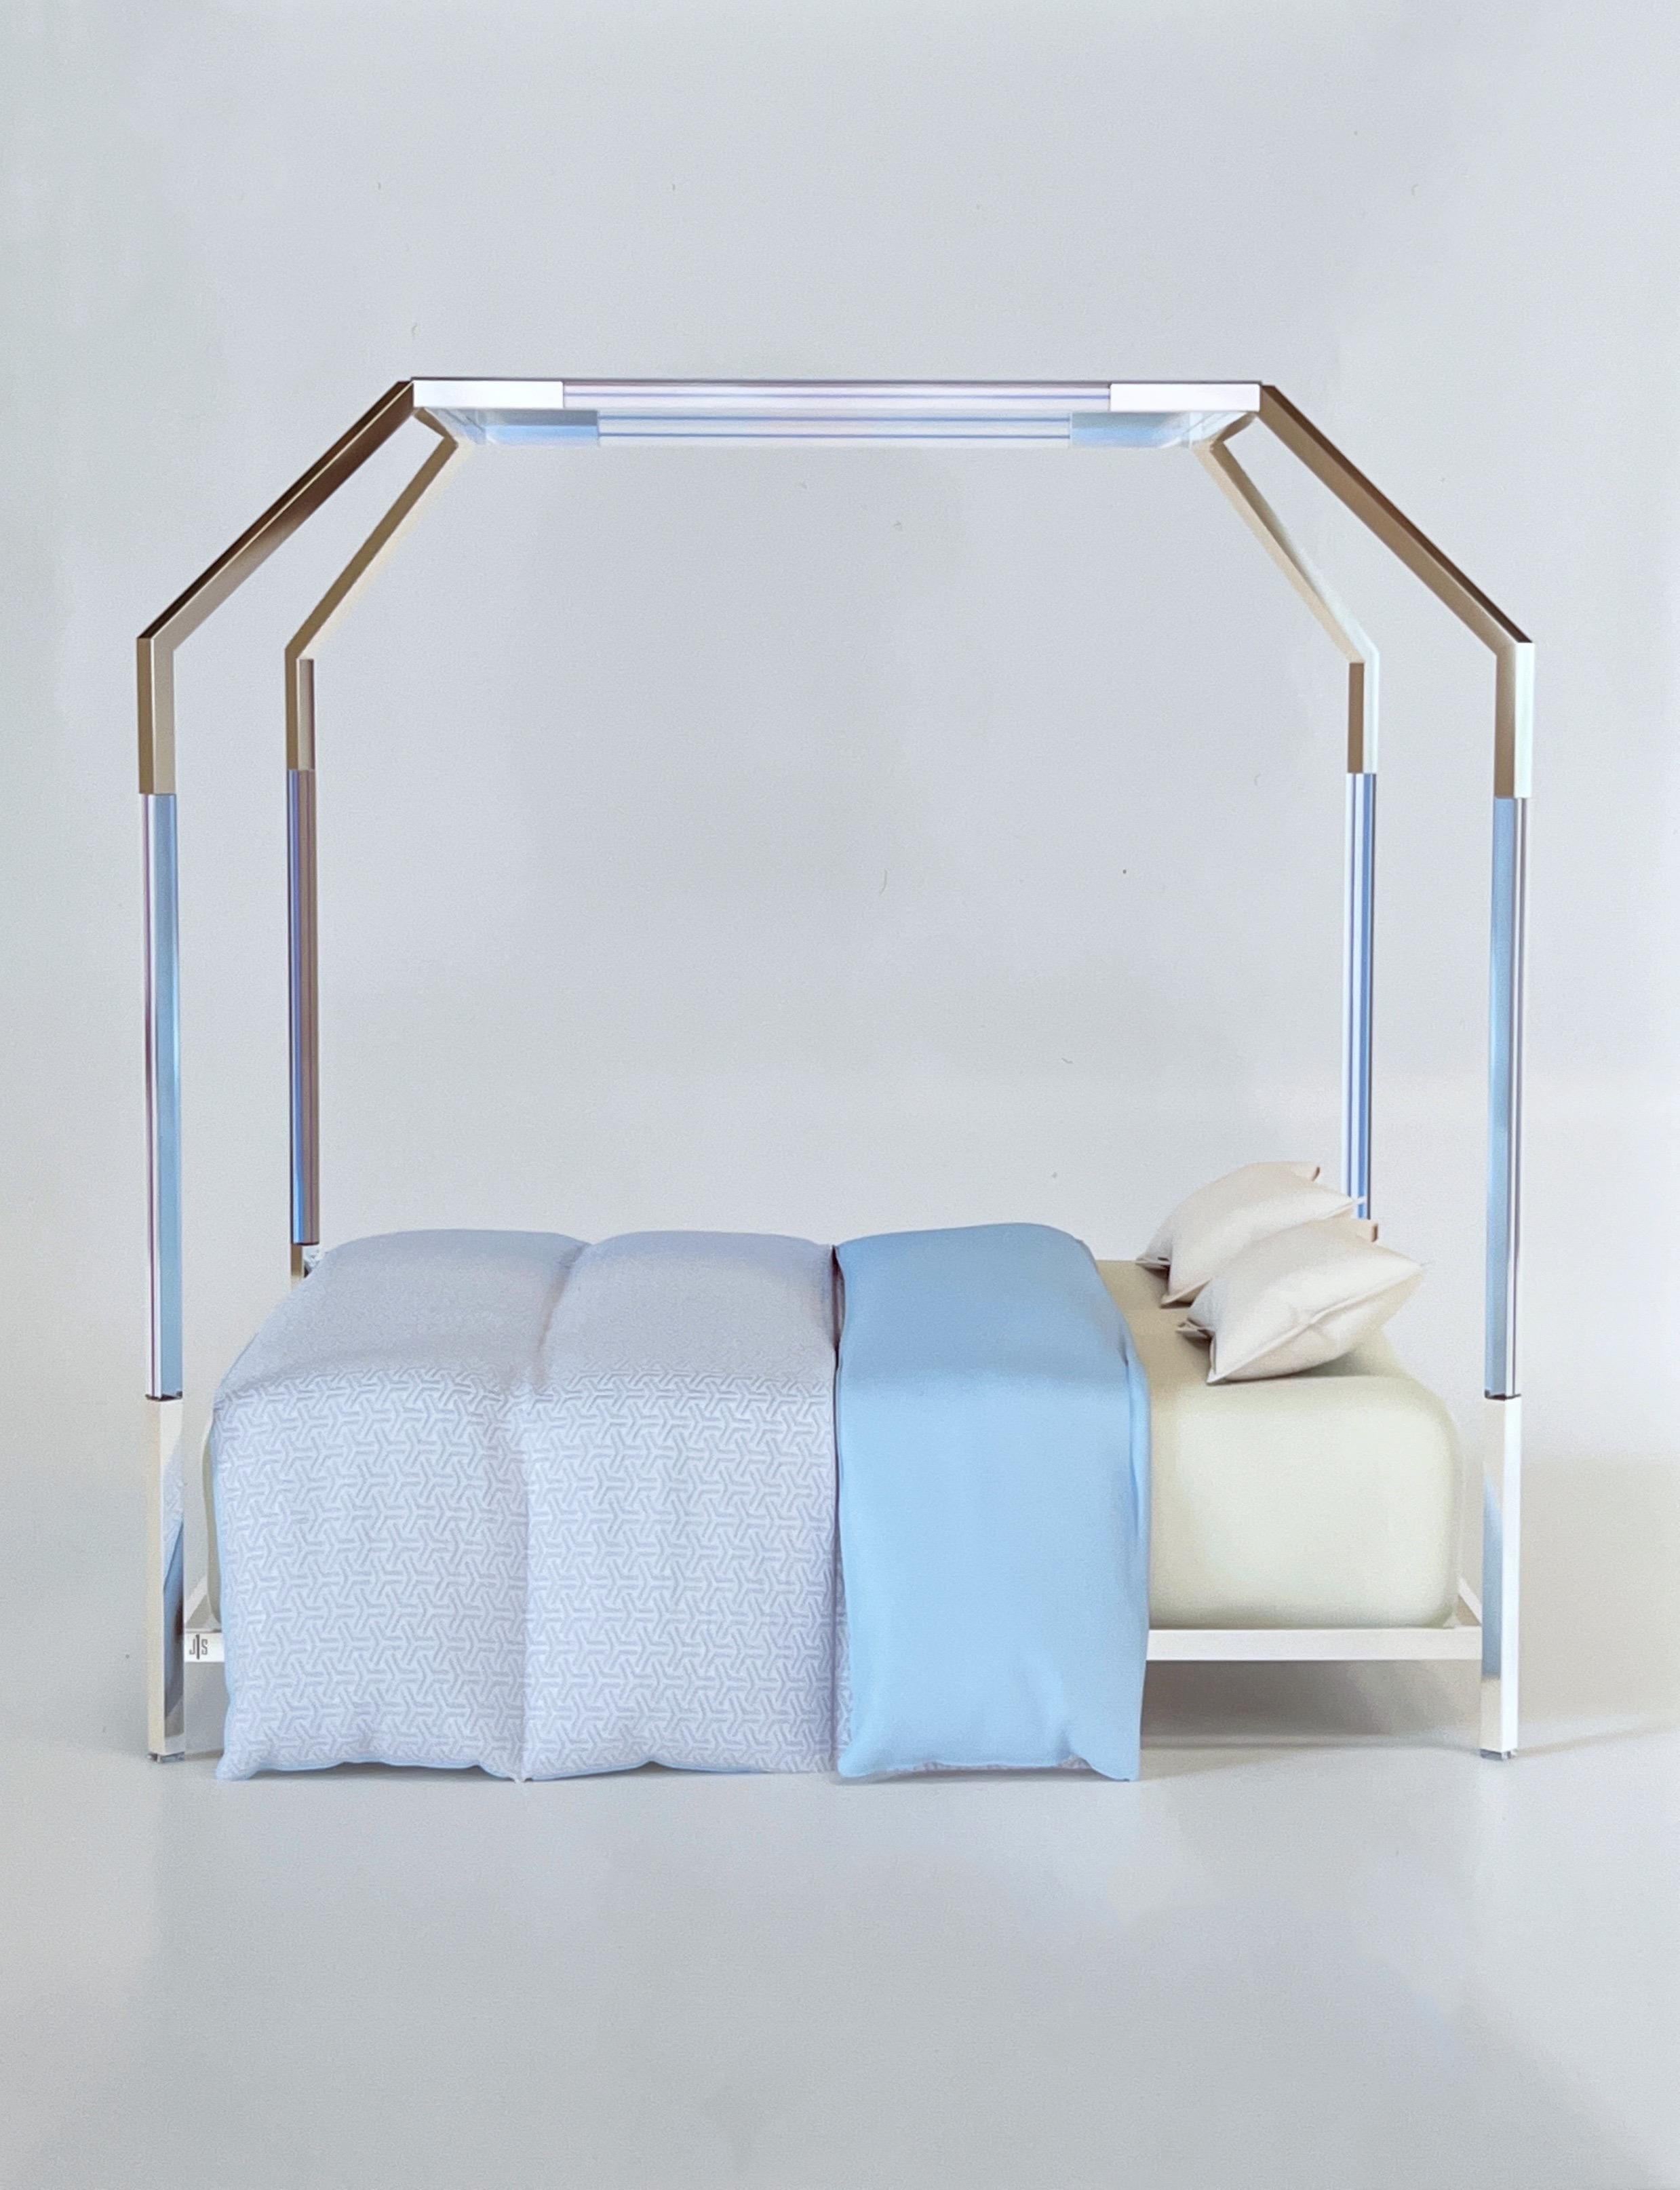 Glamorous limited edition lite blue lucite and polished nickel canopy bed by renowned American designer Charles Hollis Jones. 
It’s signed and numbered 2 of 7. 
California king size. 
Measurements: 91” Deep, 79” Wide, 92” High. 
All rights